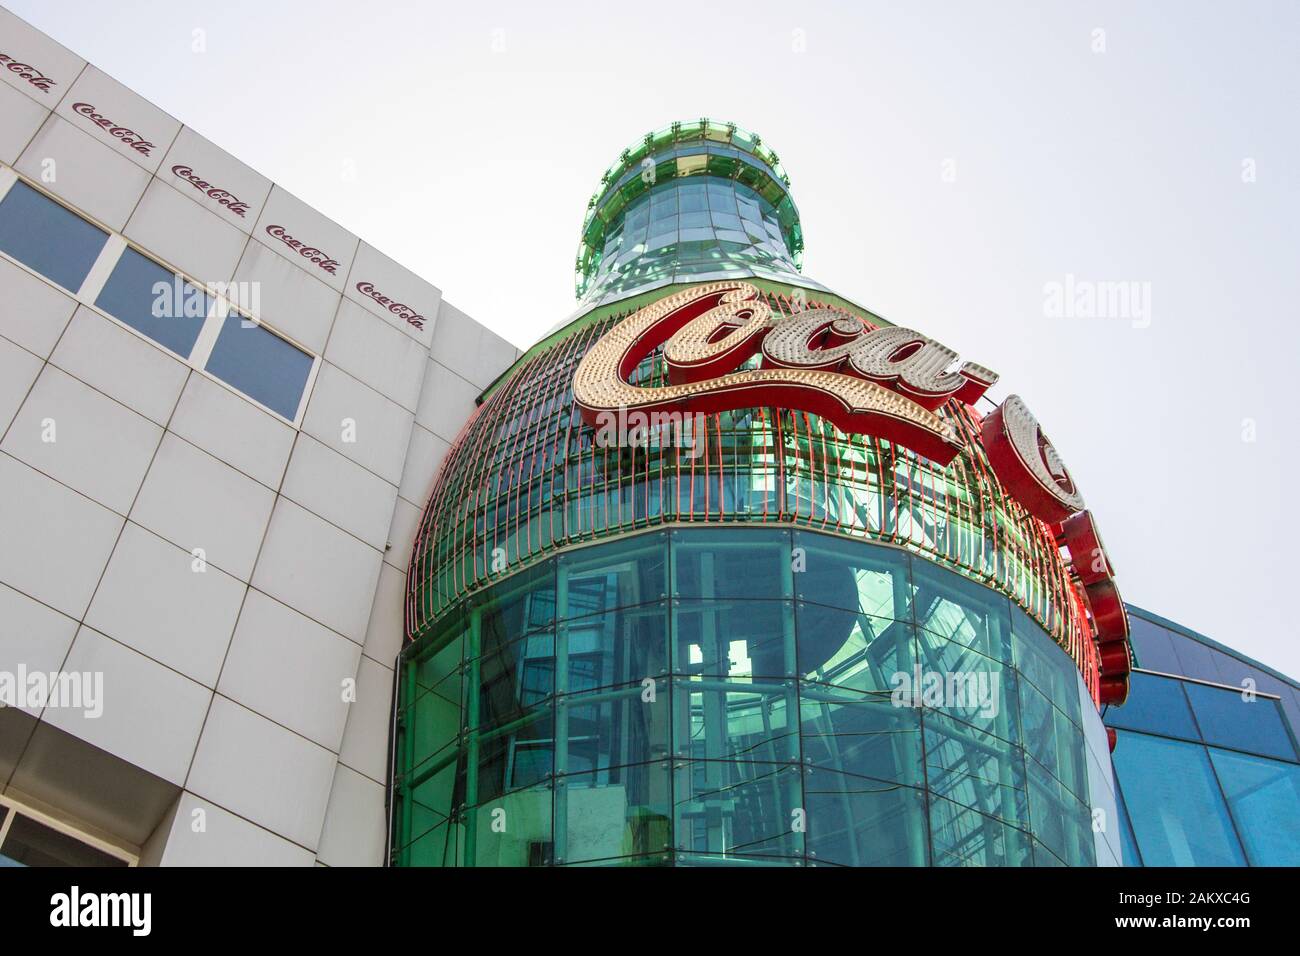 Las Vegas, Nevada, USA - May 6, 2019: The largest Coke bottle in the world at the Coca Cola store on the Las Vegas Strip in Nevada. Stock Photo